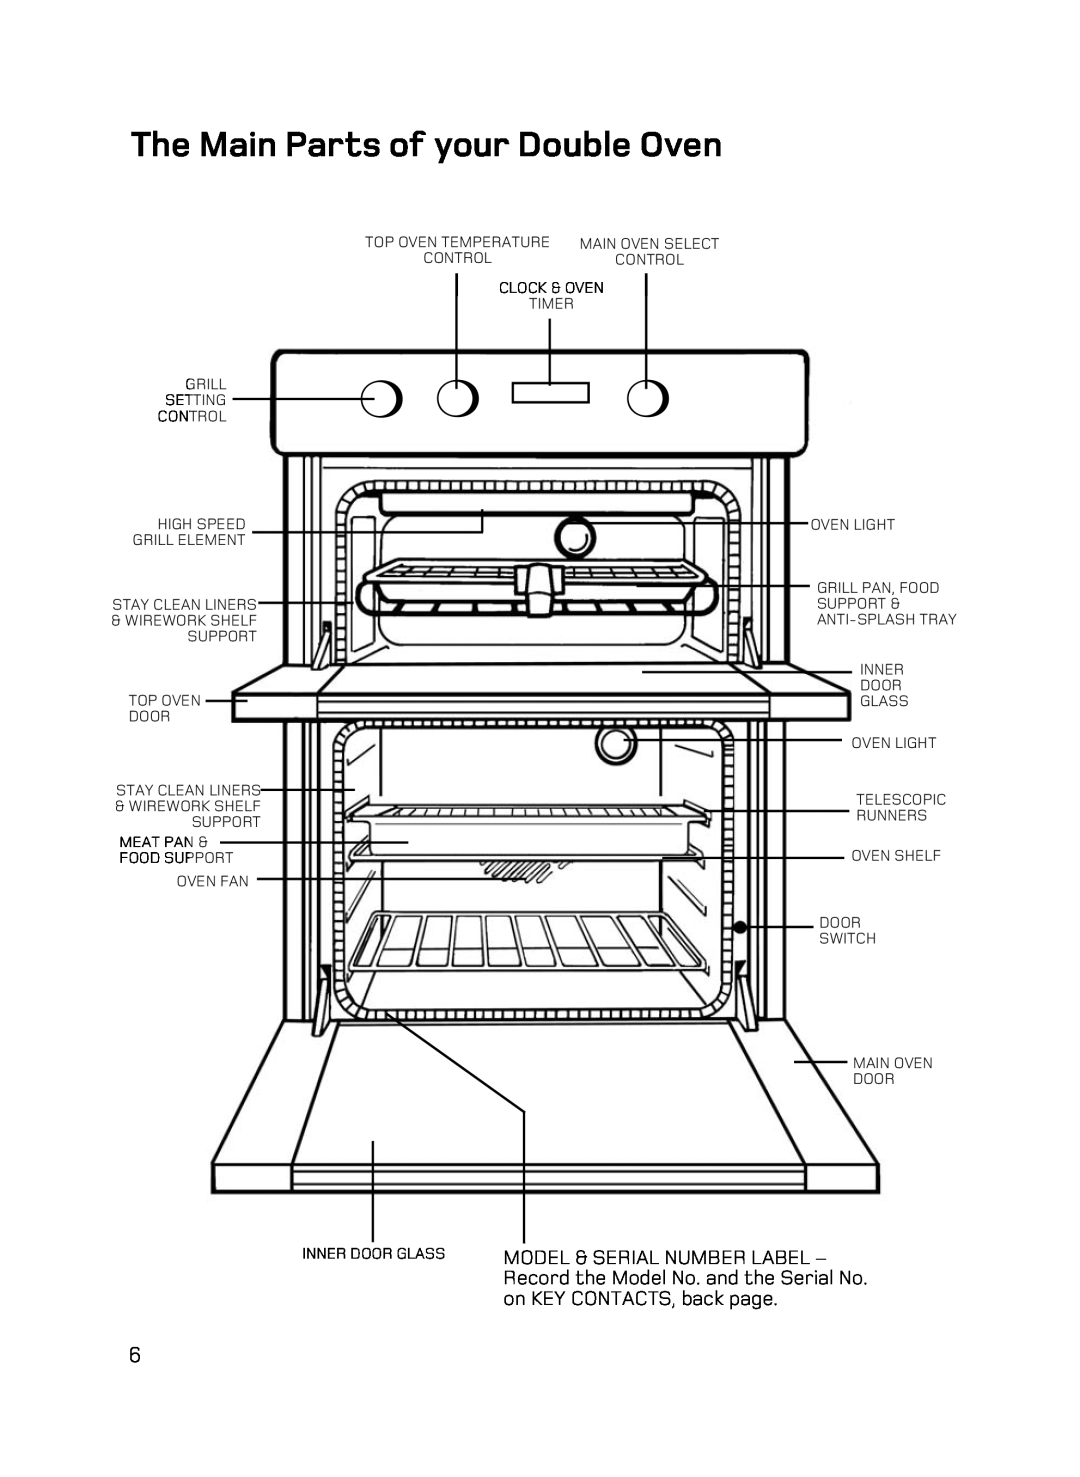 Hotpoint UE89X1 UQ89I manual The Main Parts of your Double Oven 